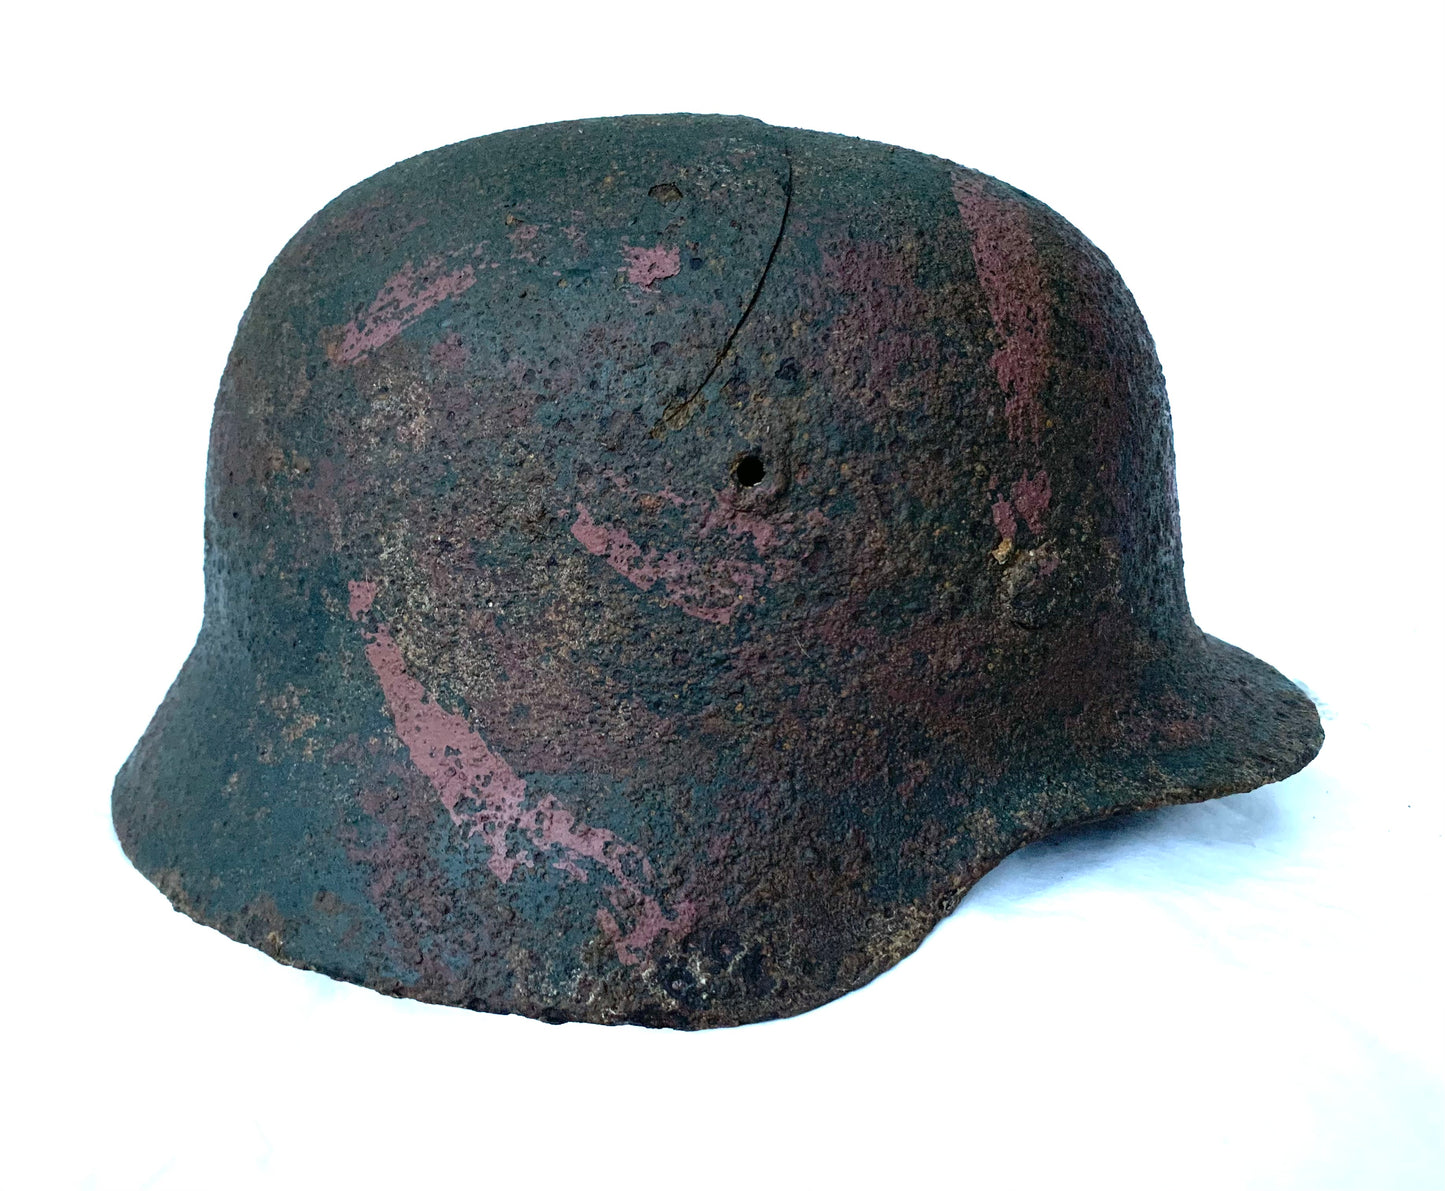 WW2 German M40 Single Decal Battle Damaged Camo Helmet recovered from the Eastern Front